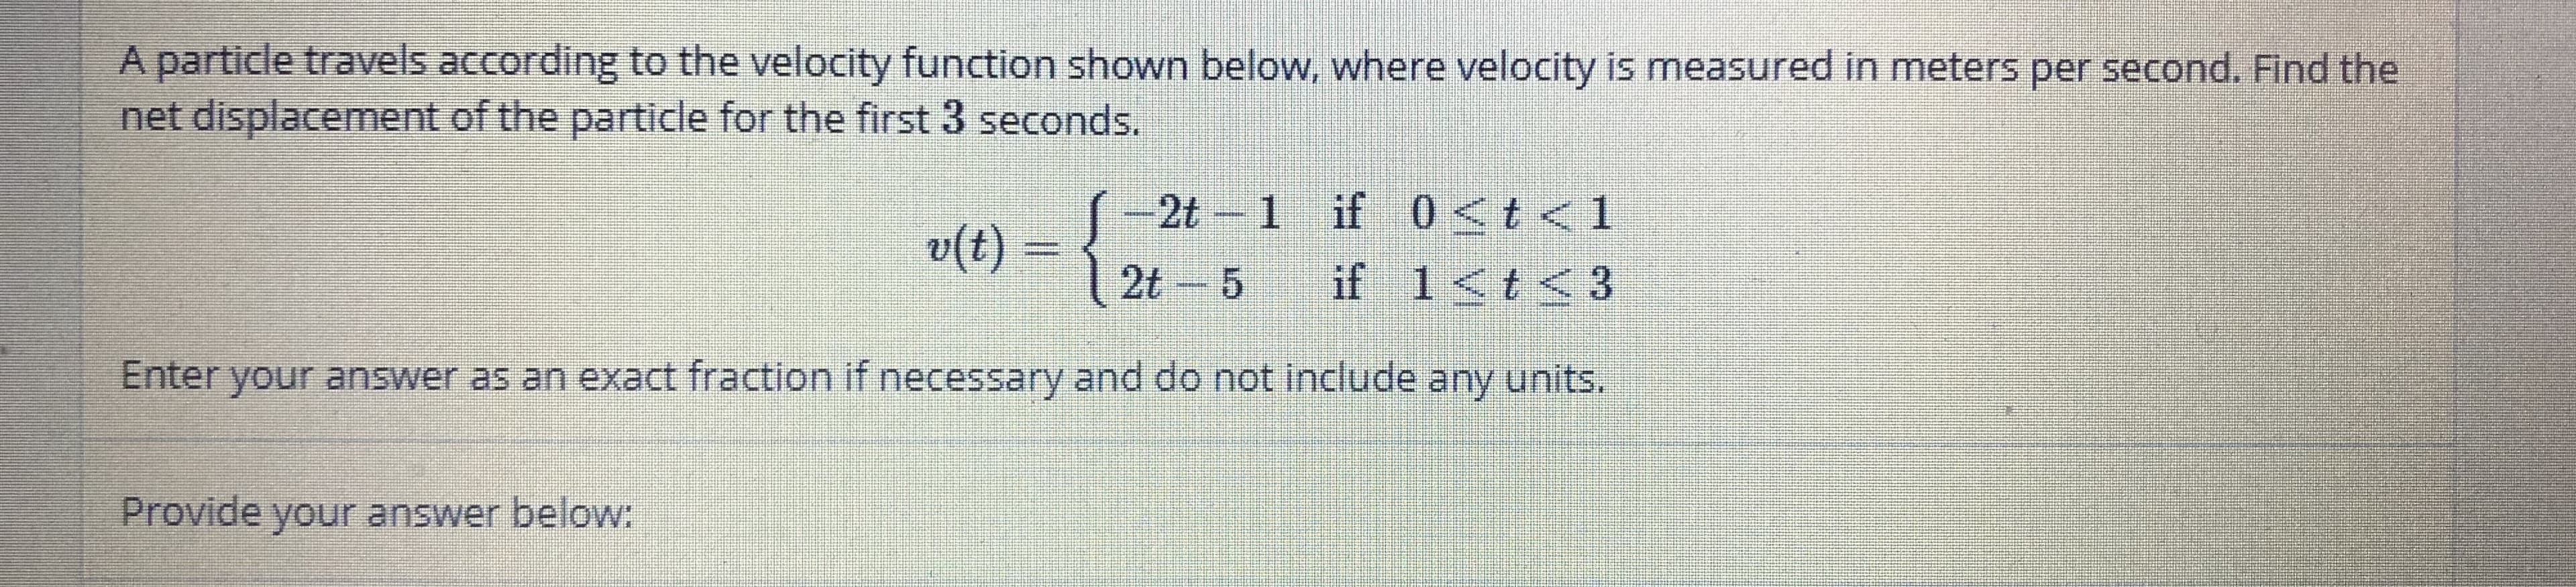 A particle travels according to the velocity function shown below, where velocity is measured in meters per second. Find the
net displacement of the particle for the first 3 seconds.
